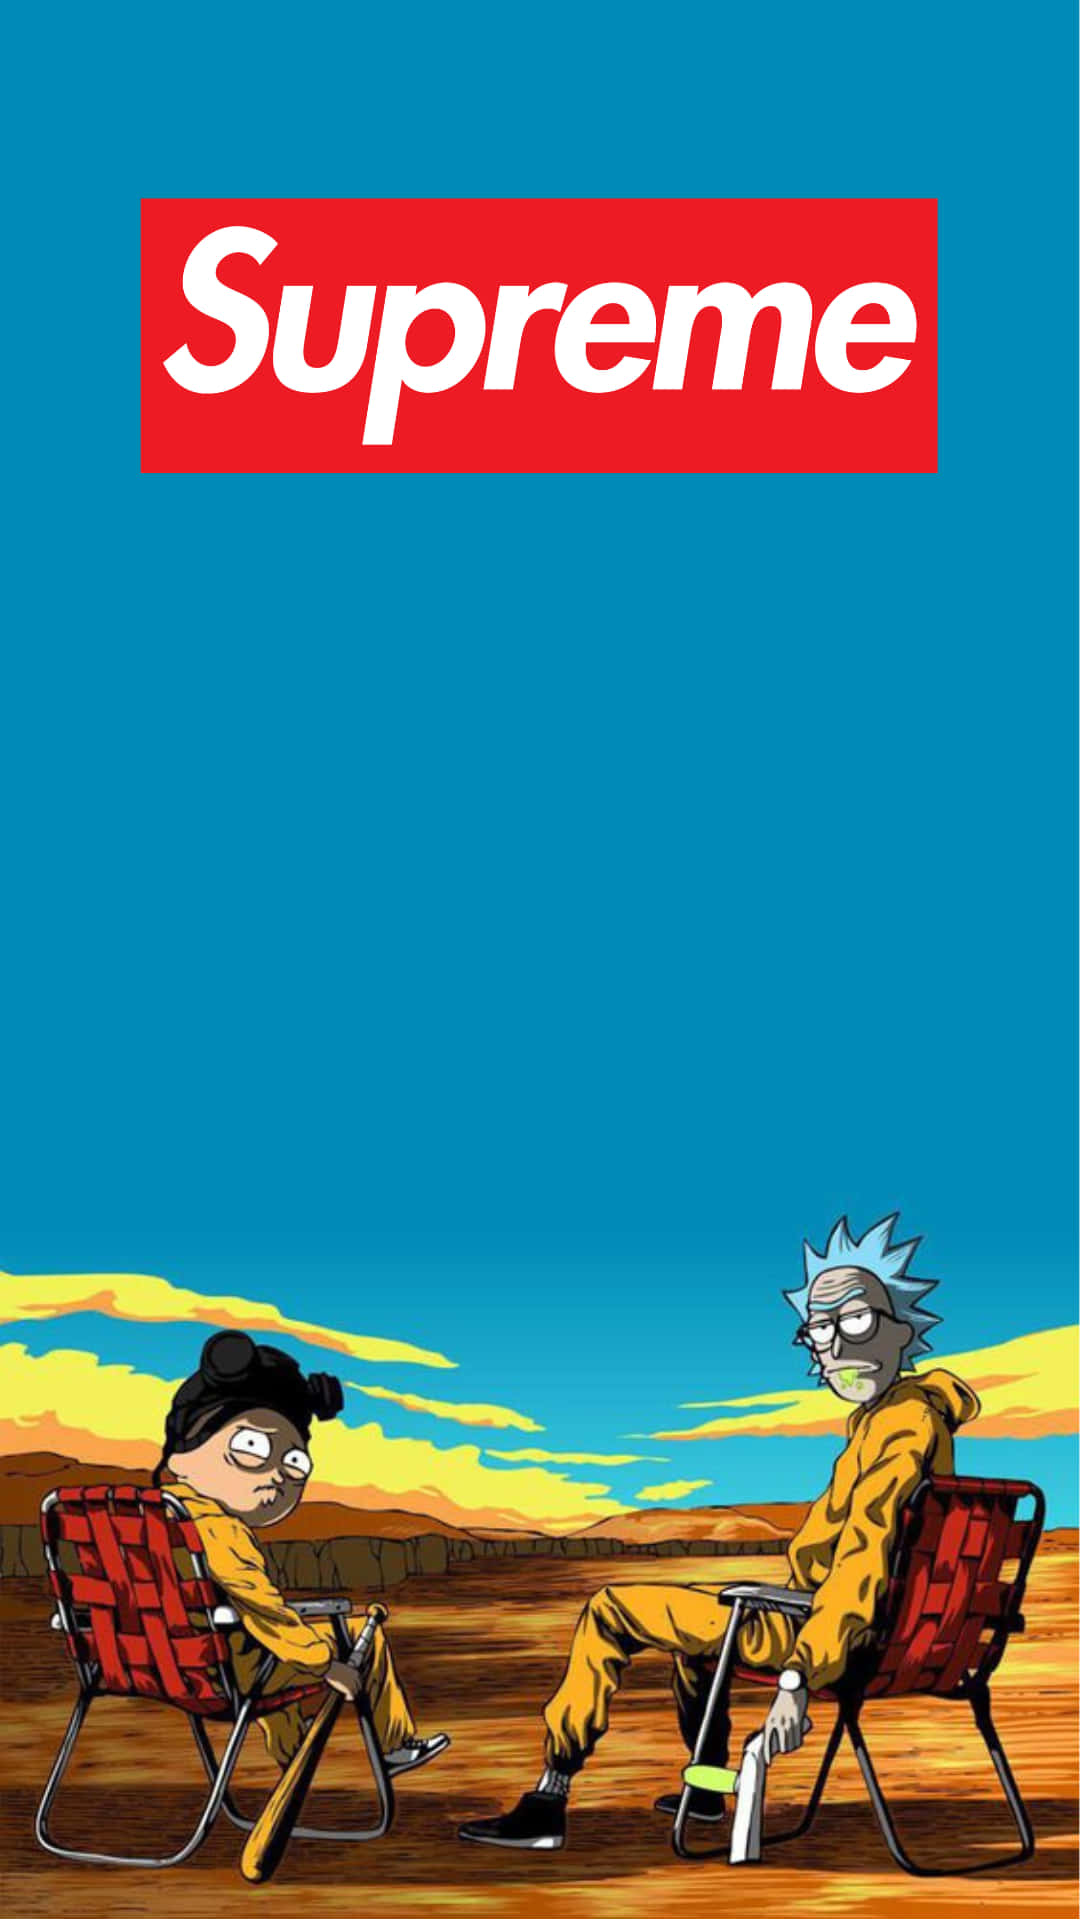 Rick and morty supreme wallpaper by RICKandFNF  Download on ZEDGE  428b